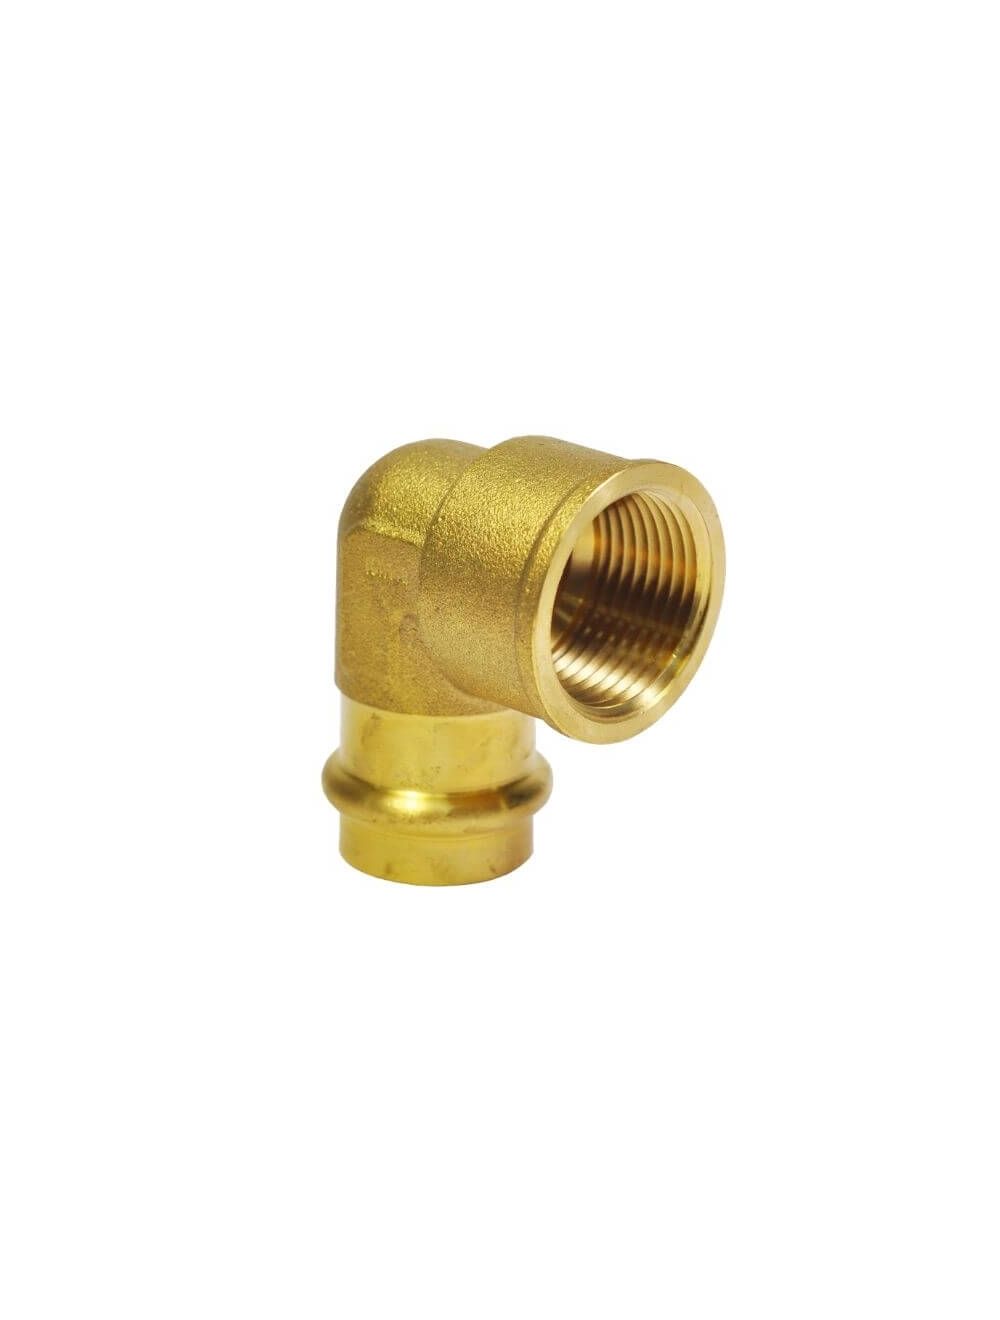 Female Elbow Press Fitting/Pipe Fittings/Plumbing/Copper/Sanitary